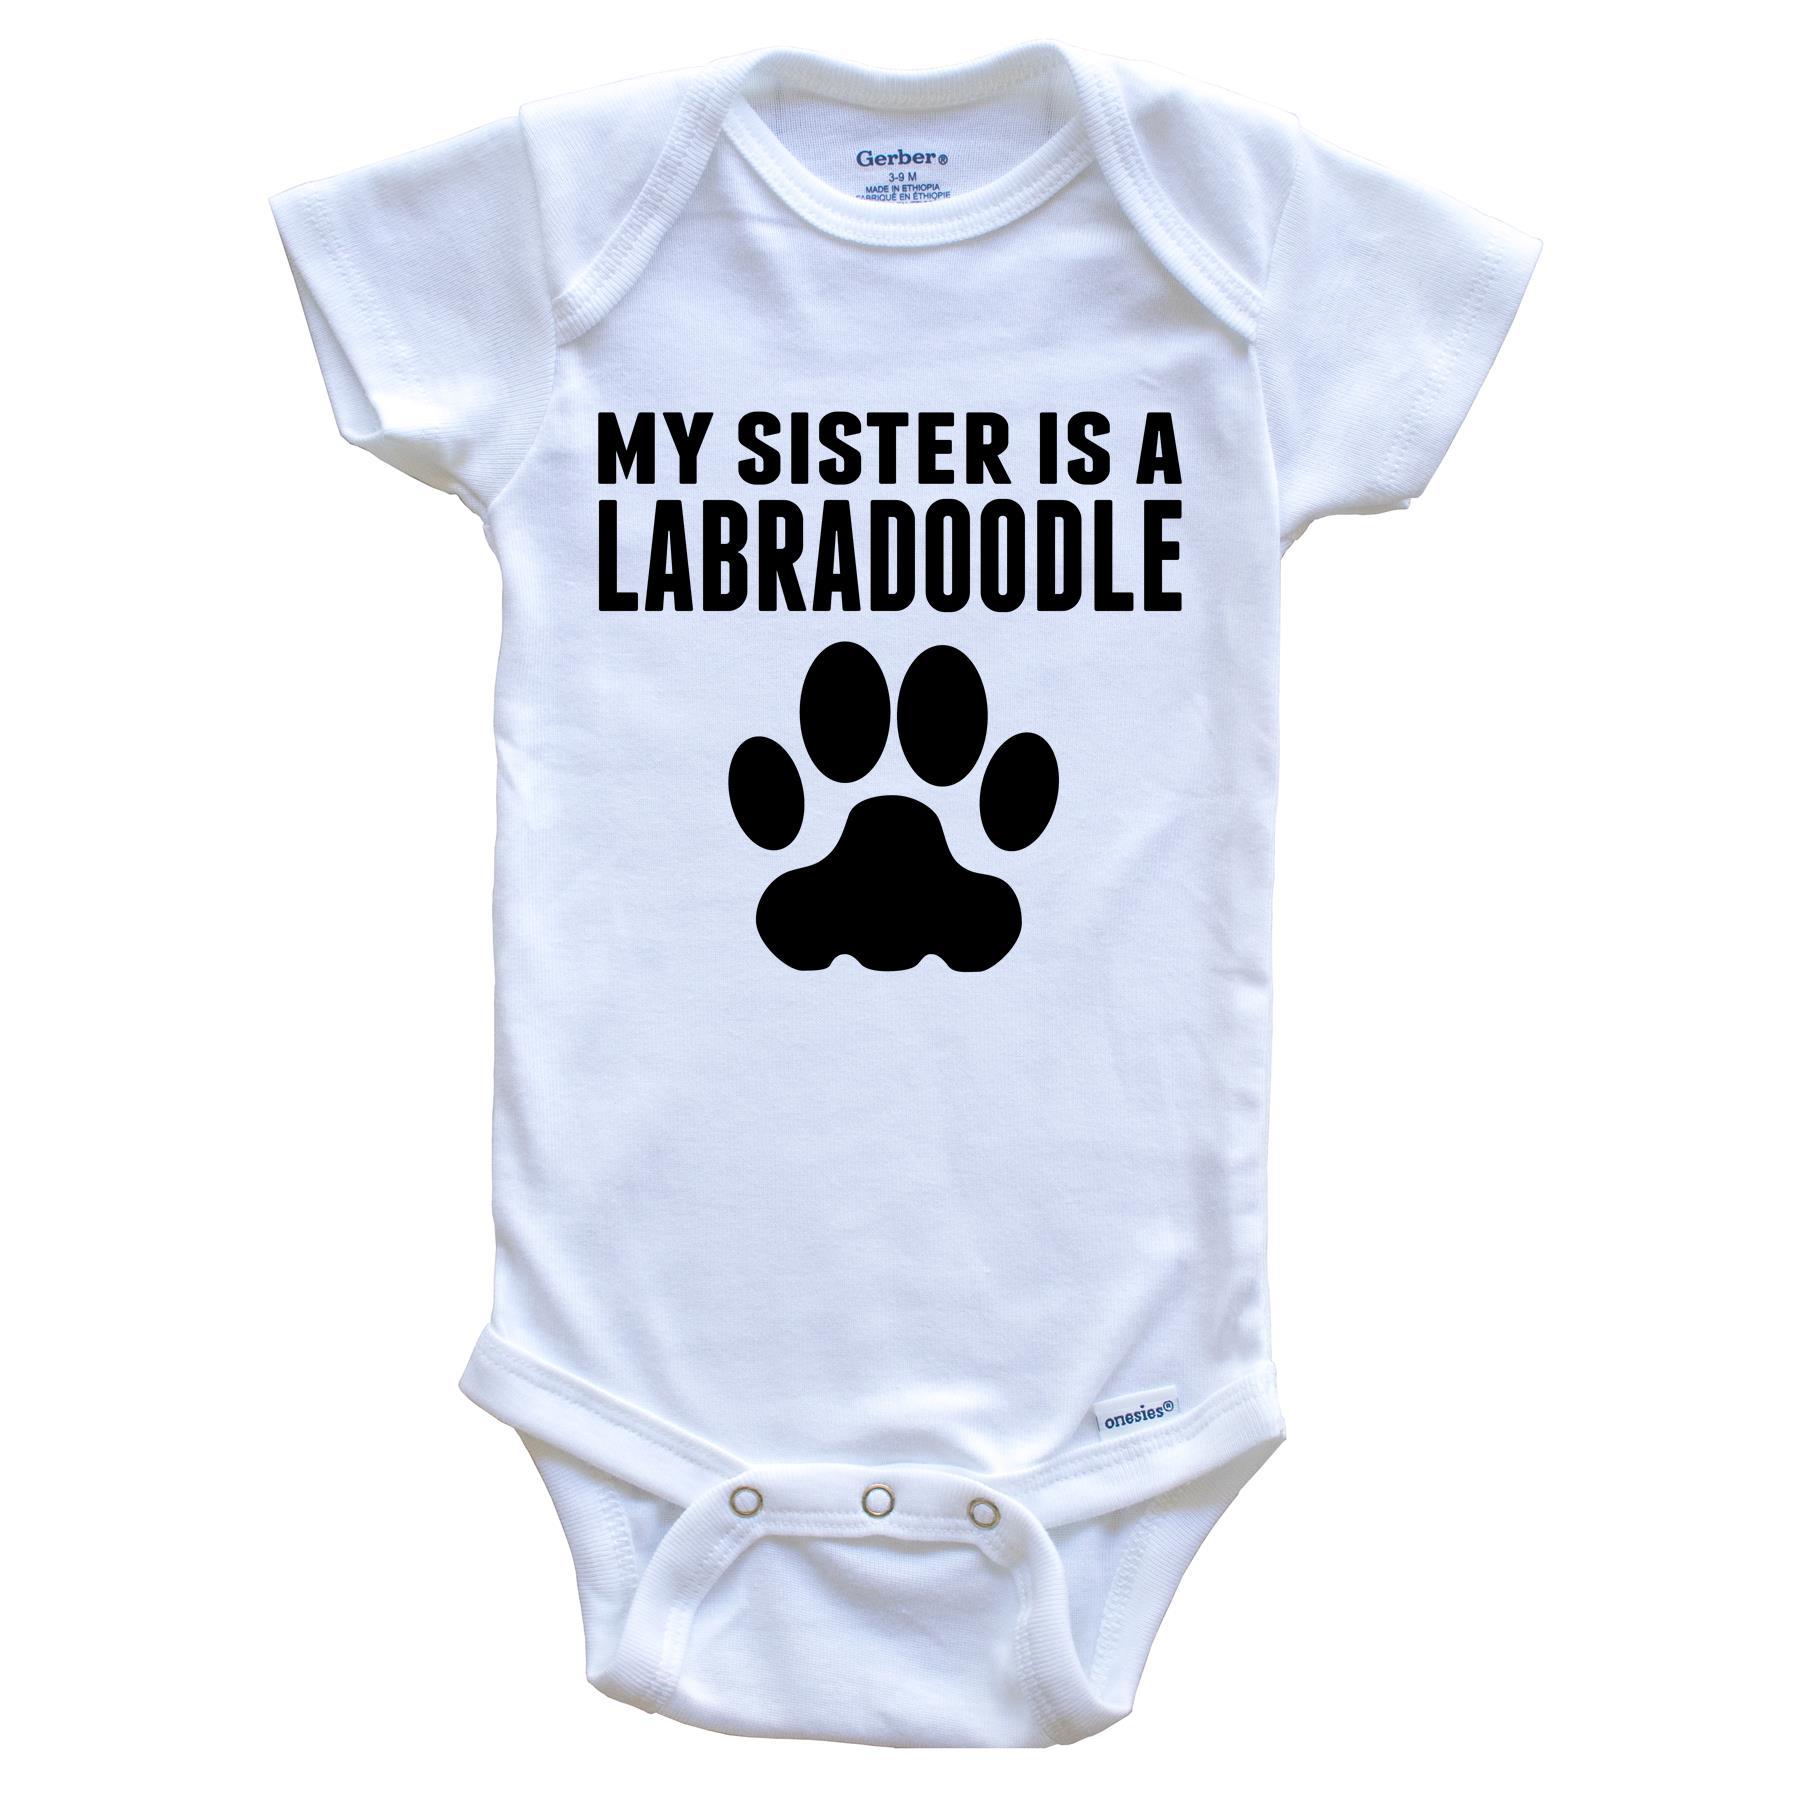 My Sister Is A Labradoodle Baby Onesie